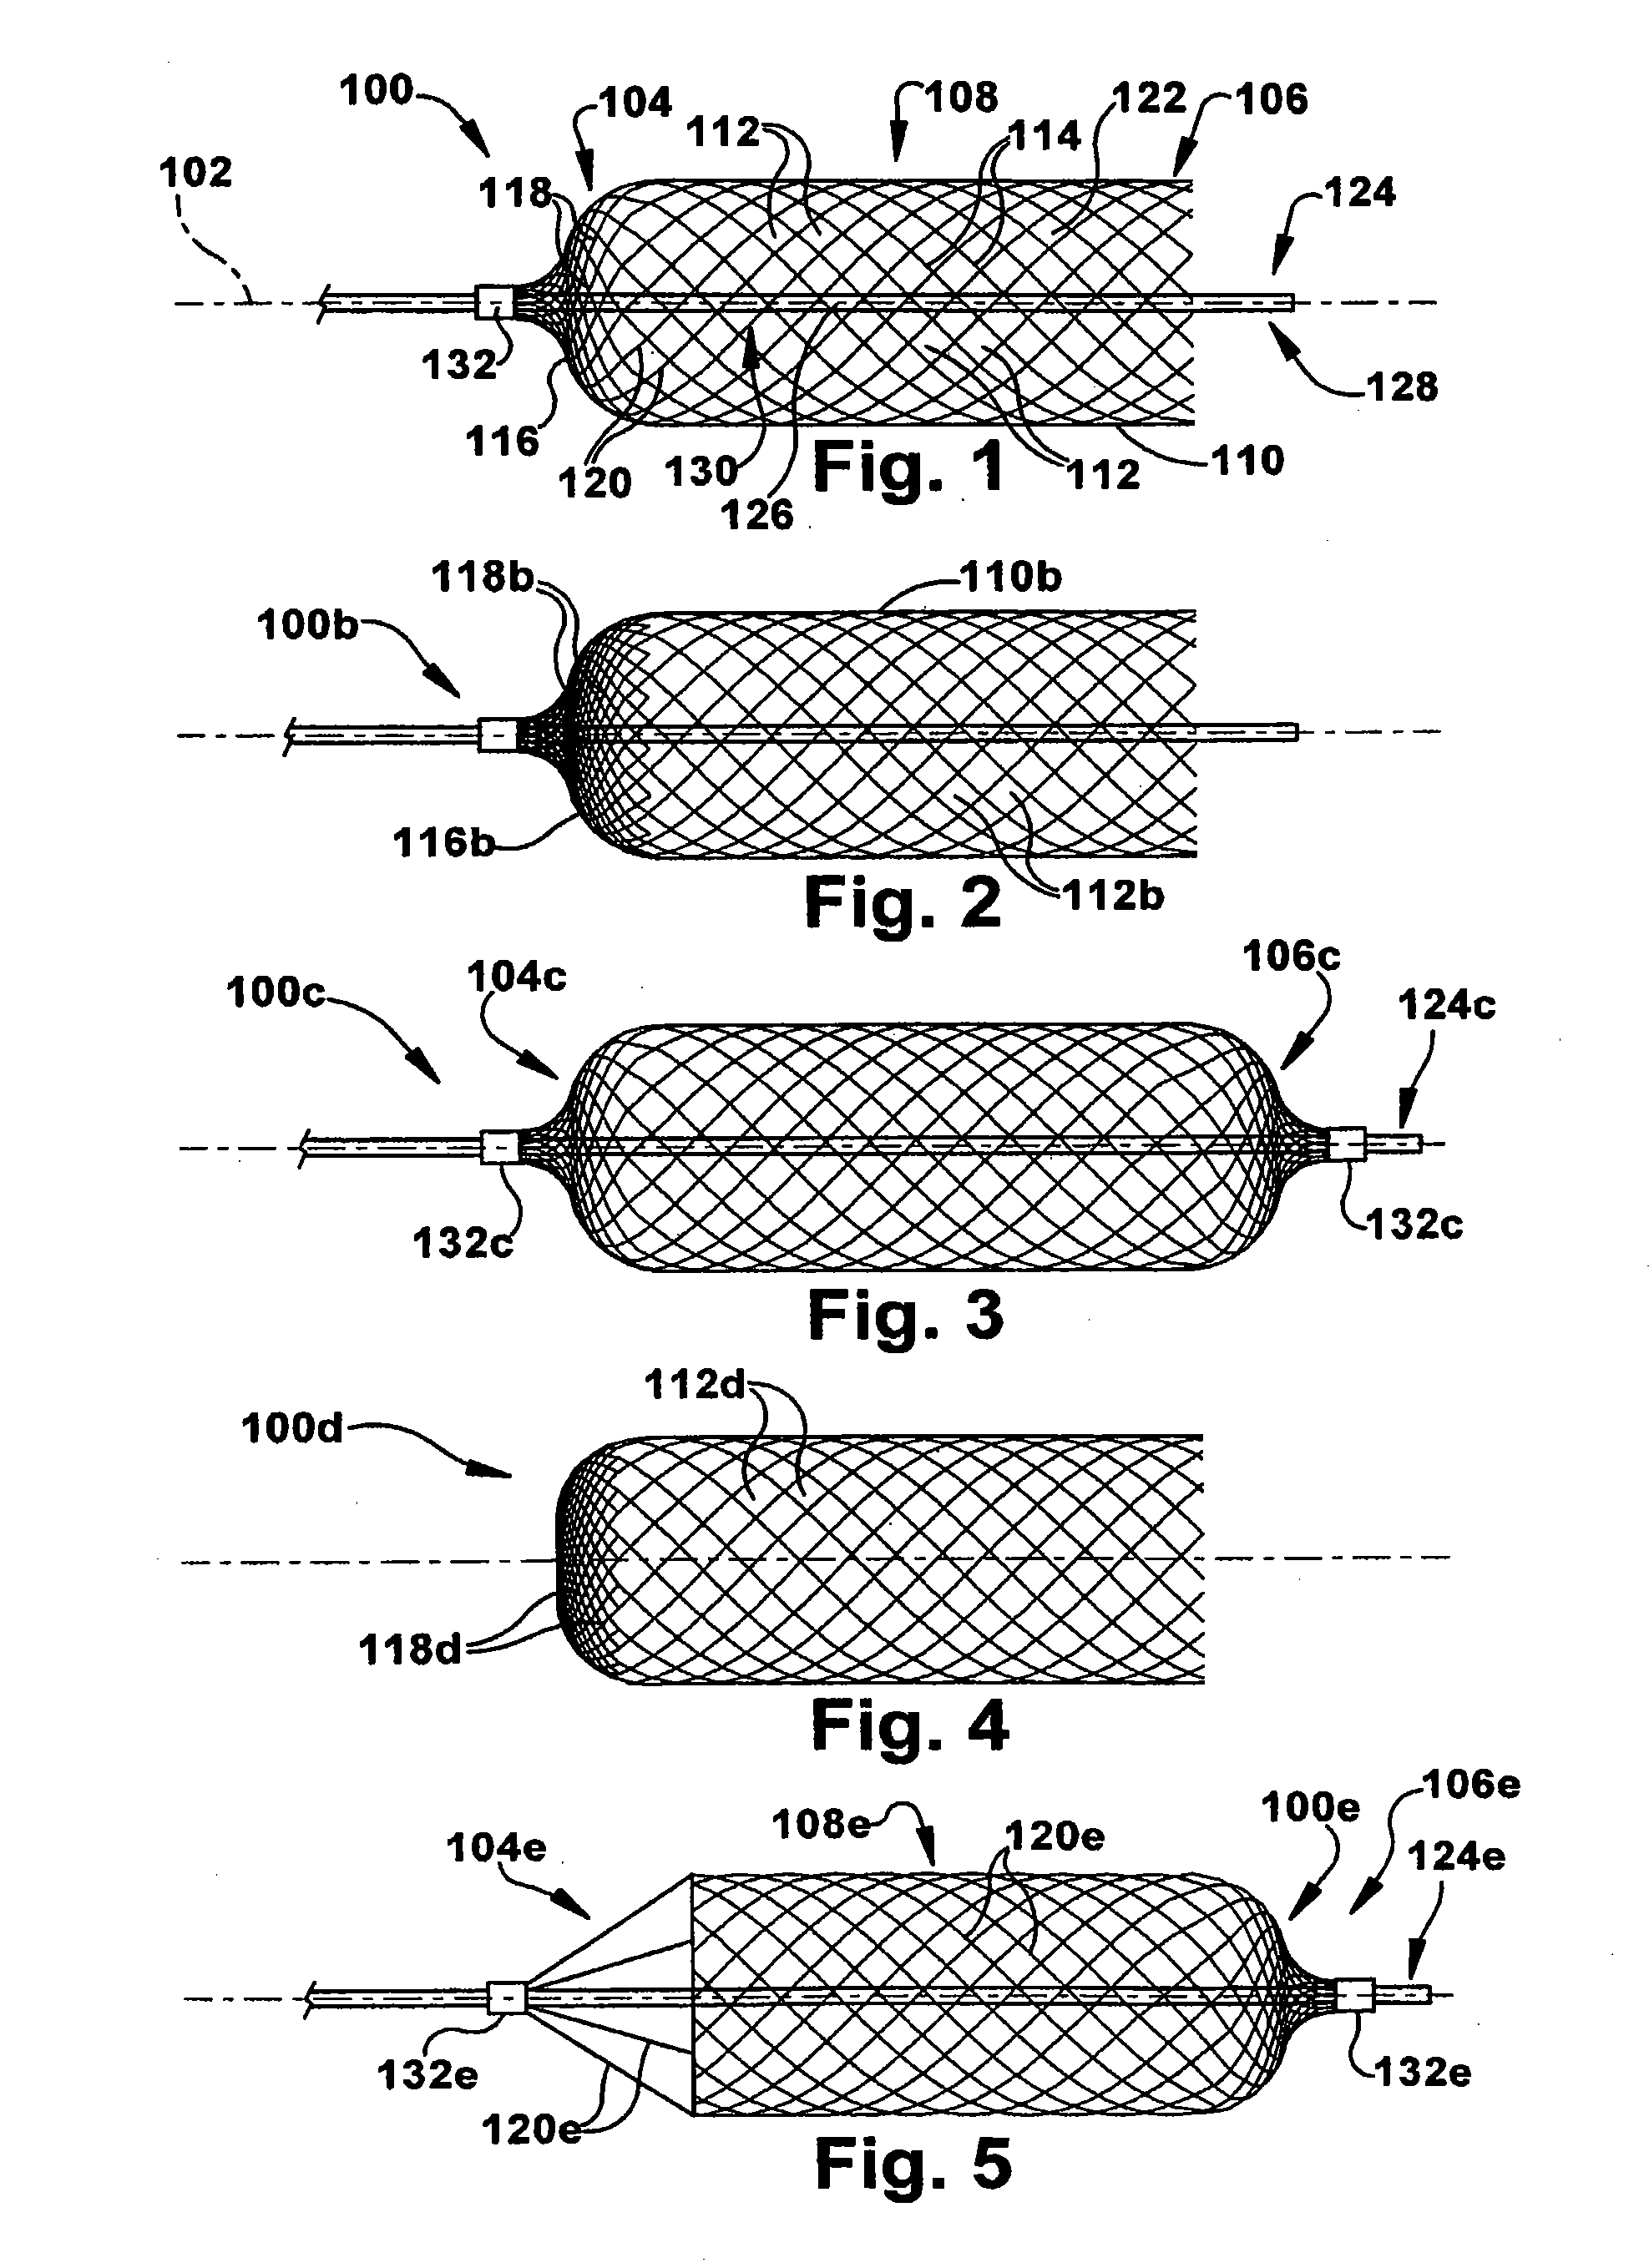 Method and apparatus for increasing blood flow through an obstructed blood vessel